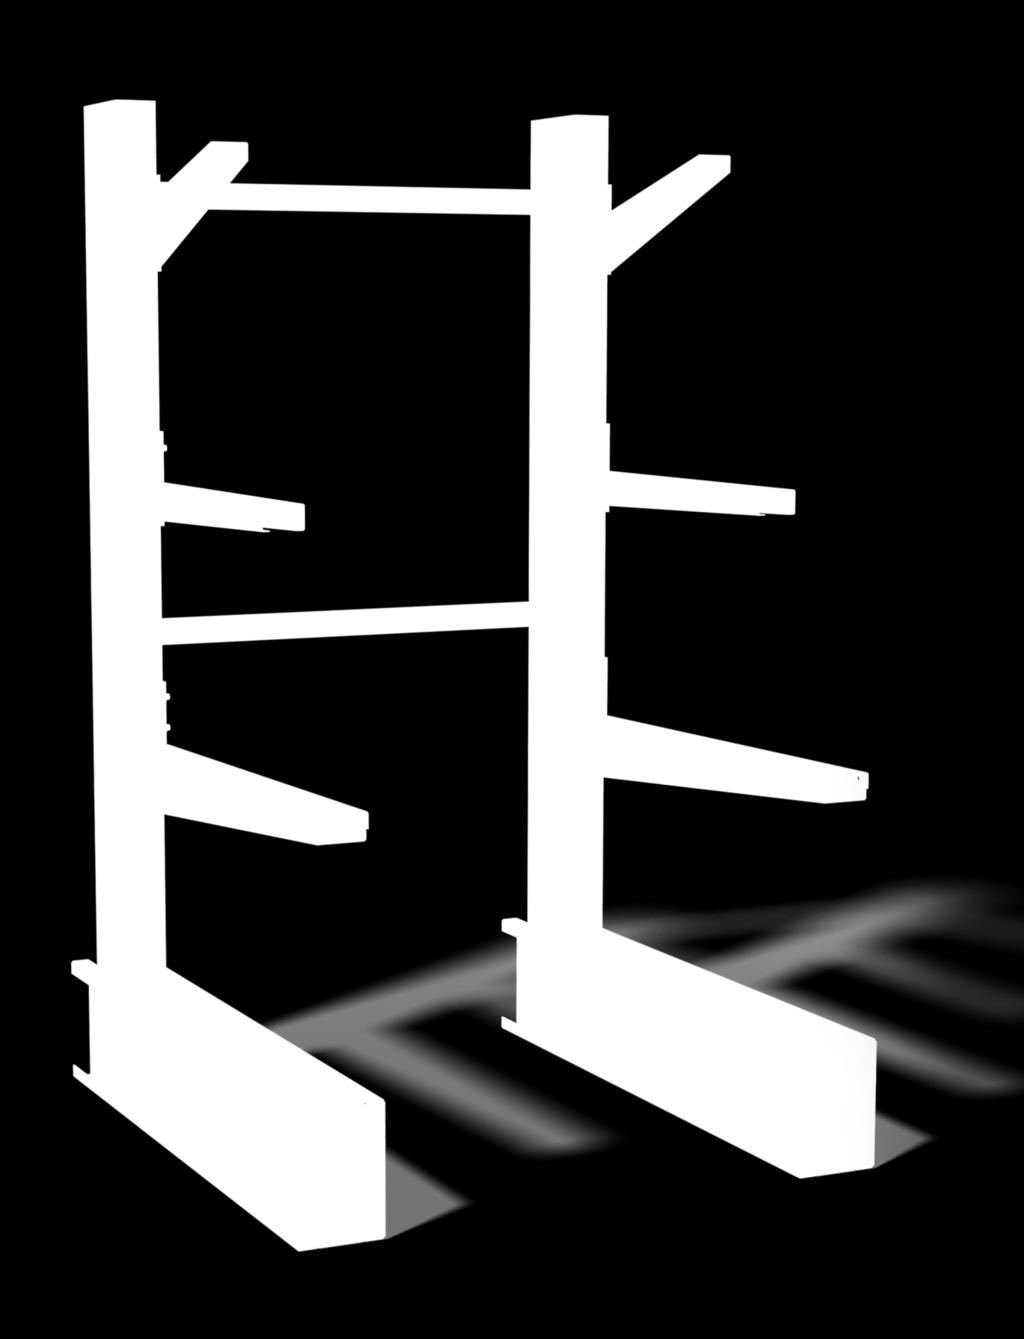 plate as well as welded column-to-base connections. Safety factors for columns and arms 1.56 minimum (1.